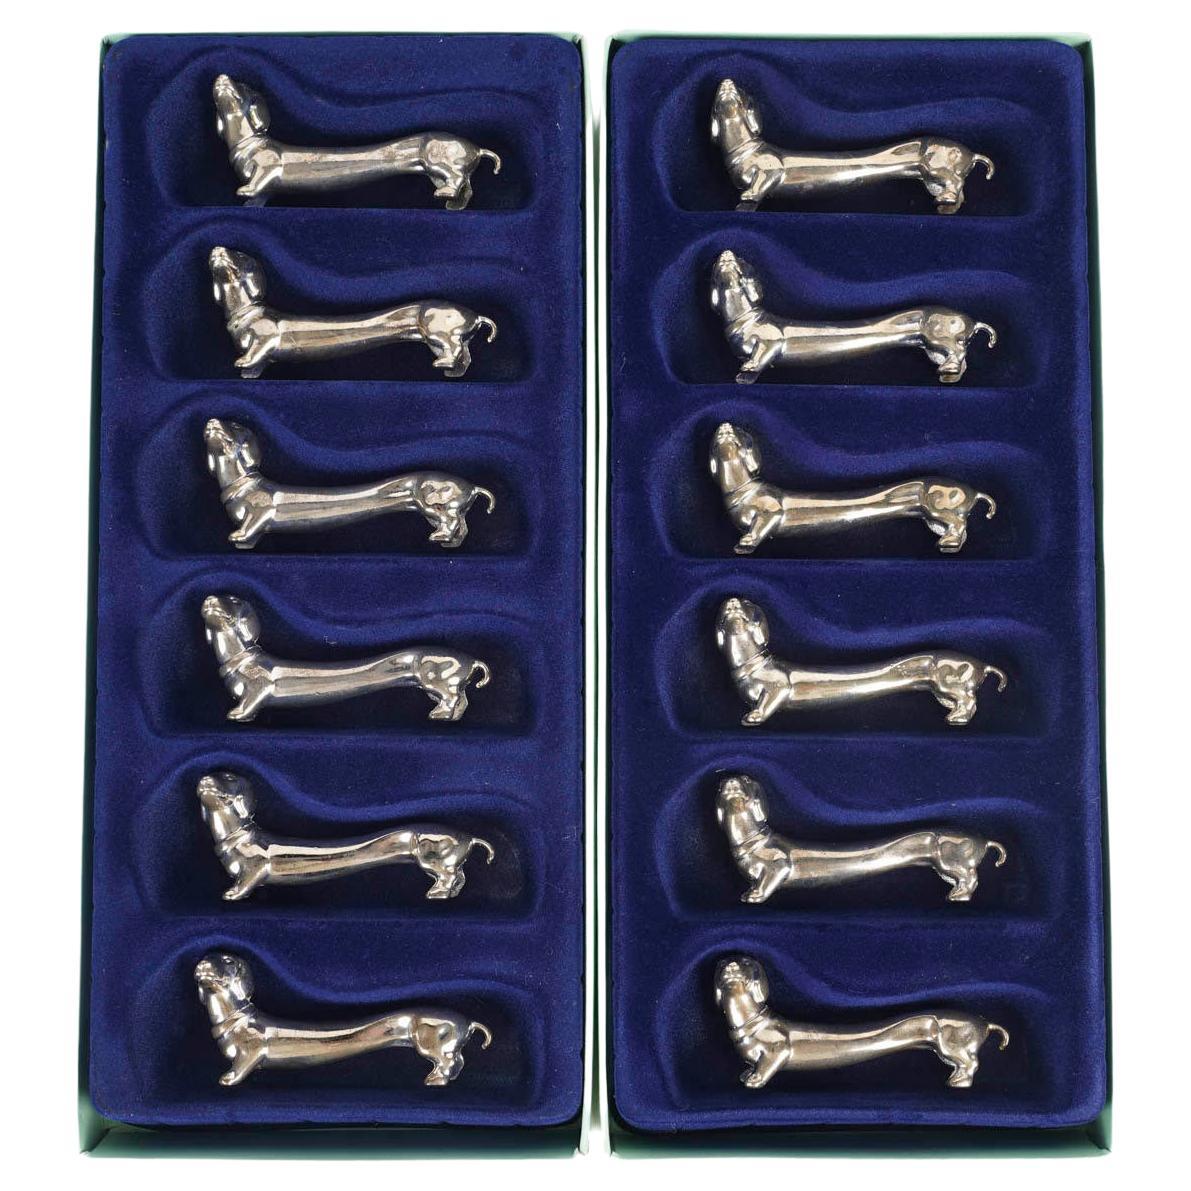 Suite of 12 Silver-Plated Dog-Shaped Knife Rests, 1980.